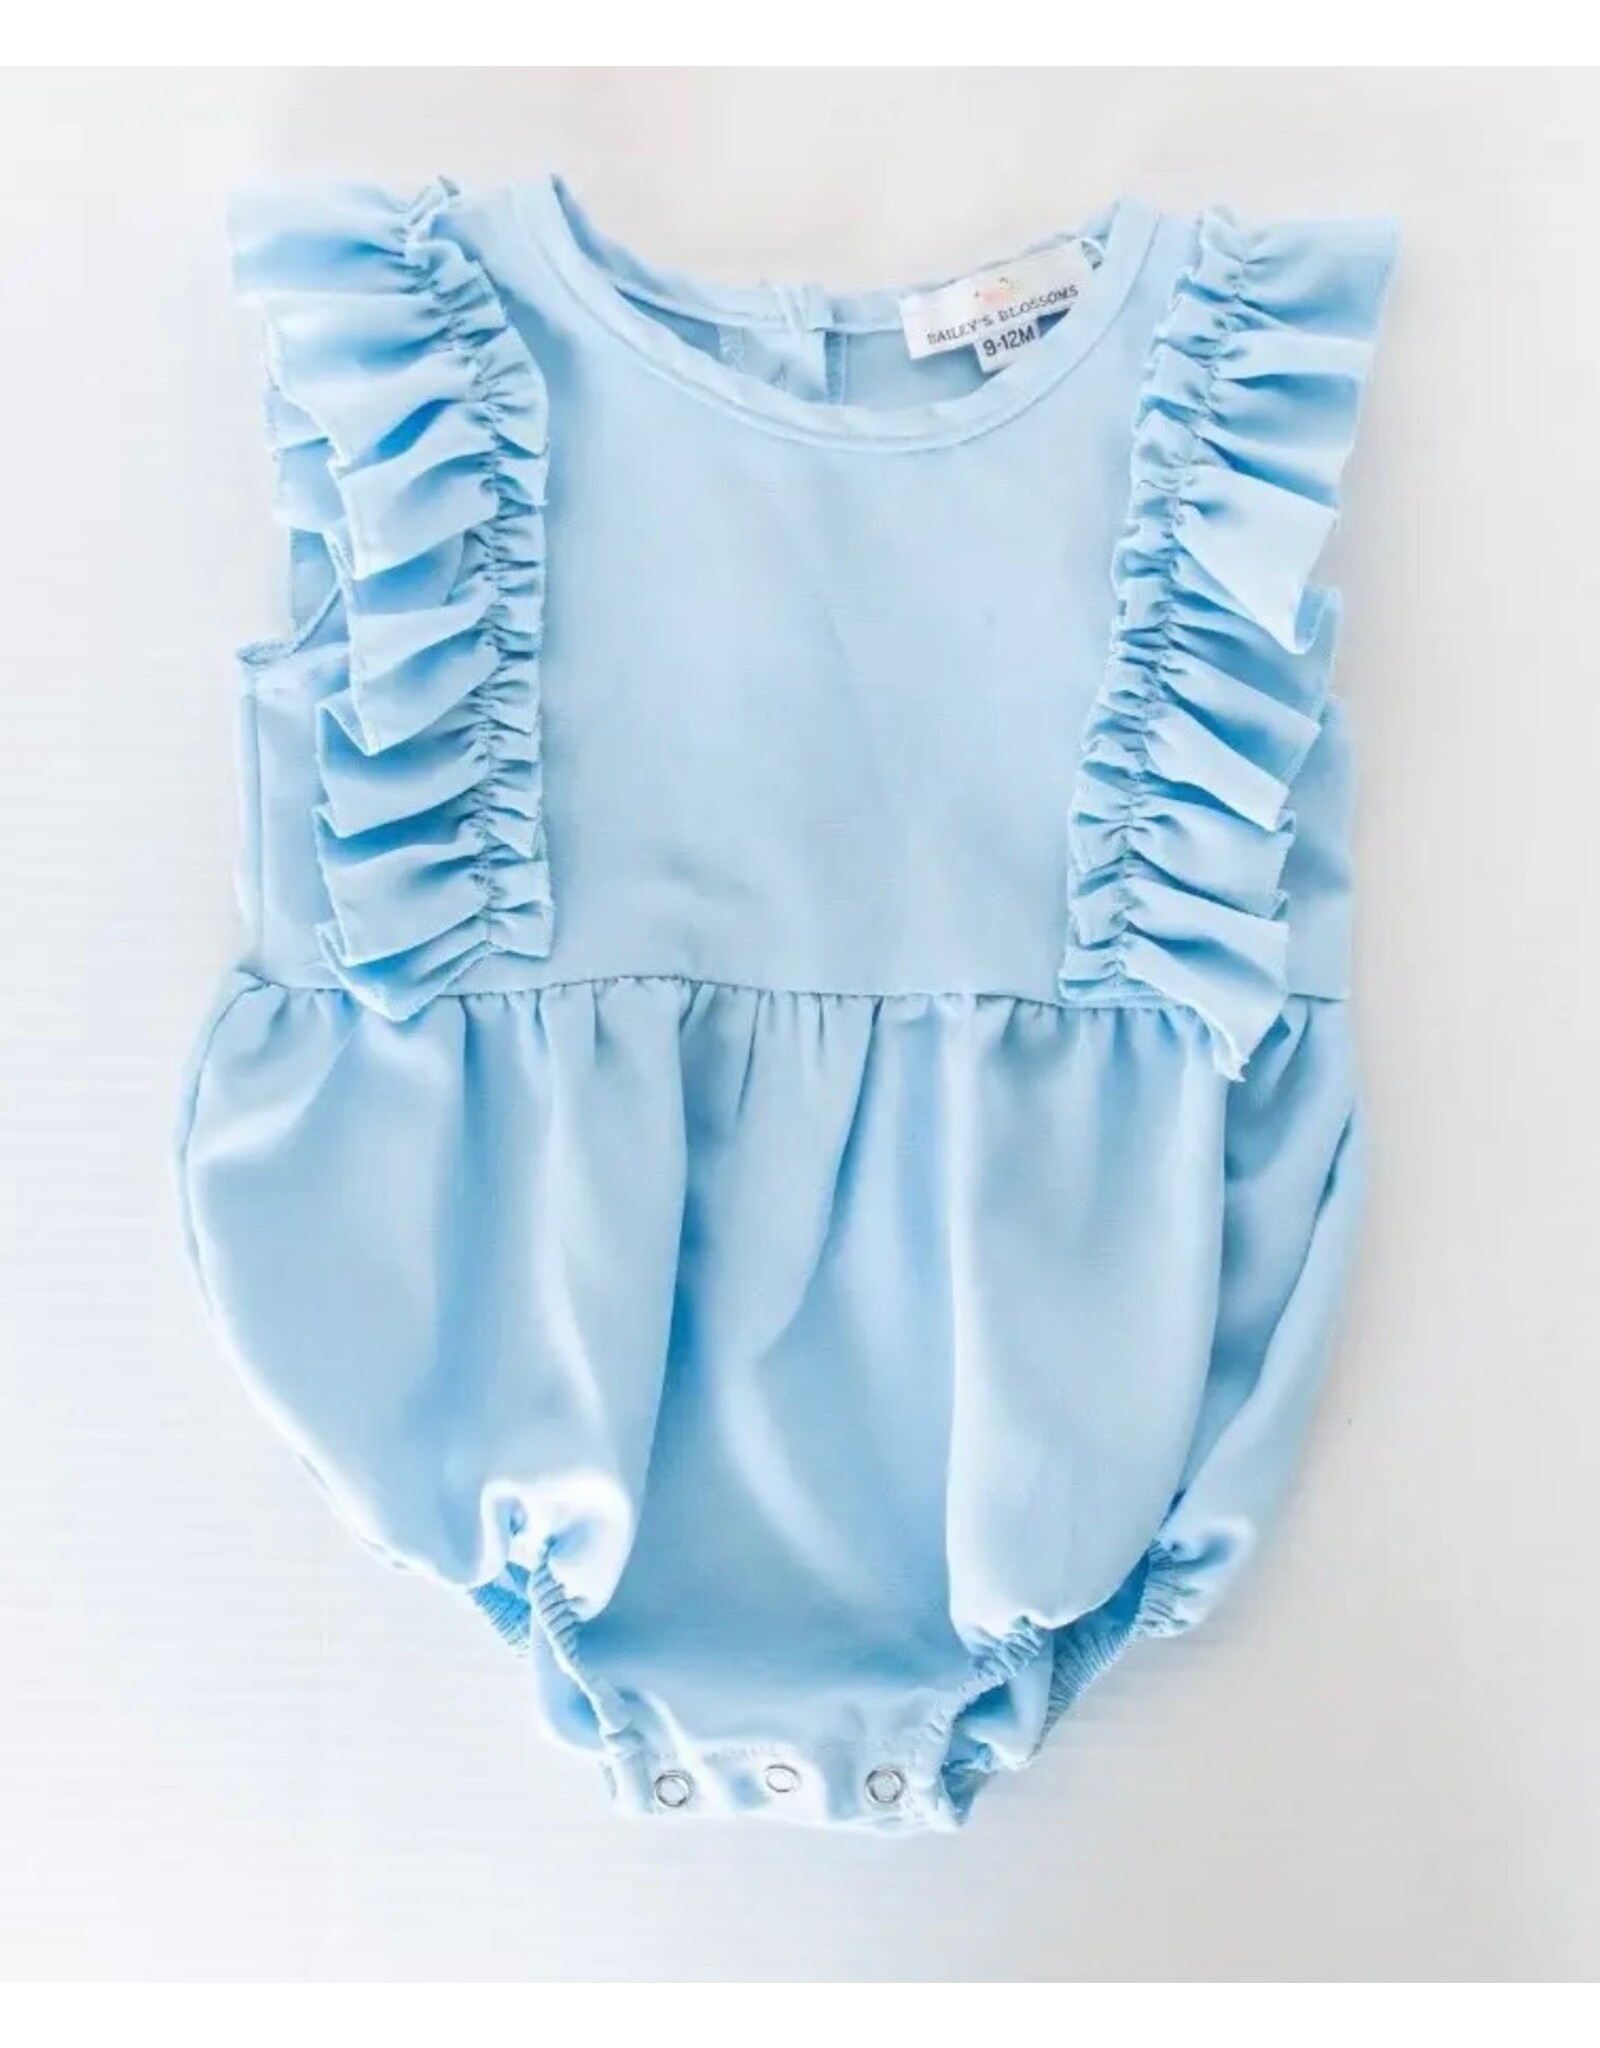 Baileys Blossoms Bailey's Blossoms- Cool Blue Madeline Ruffle Bubble